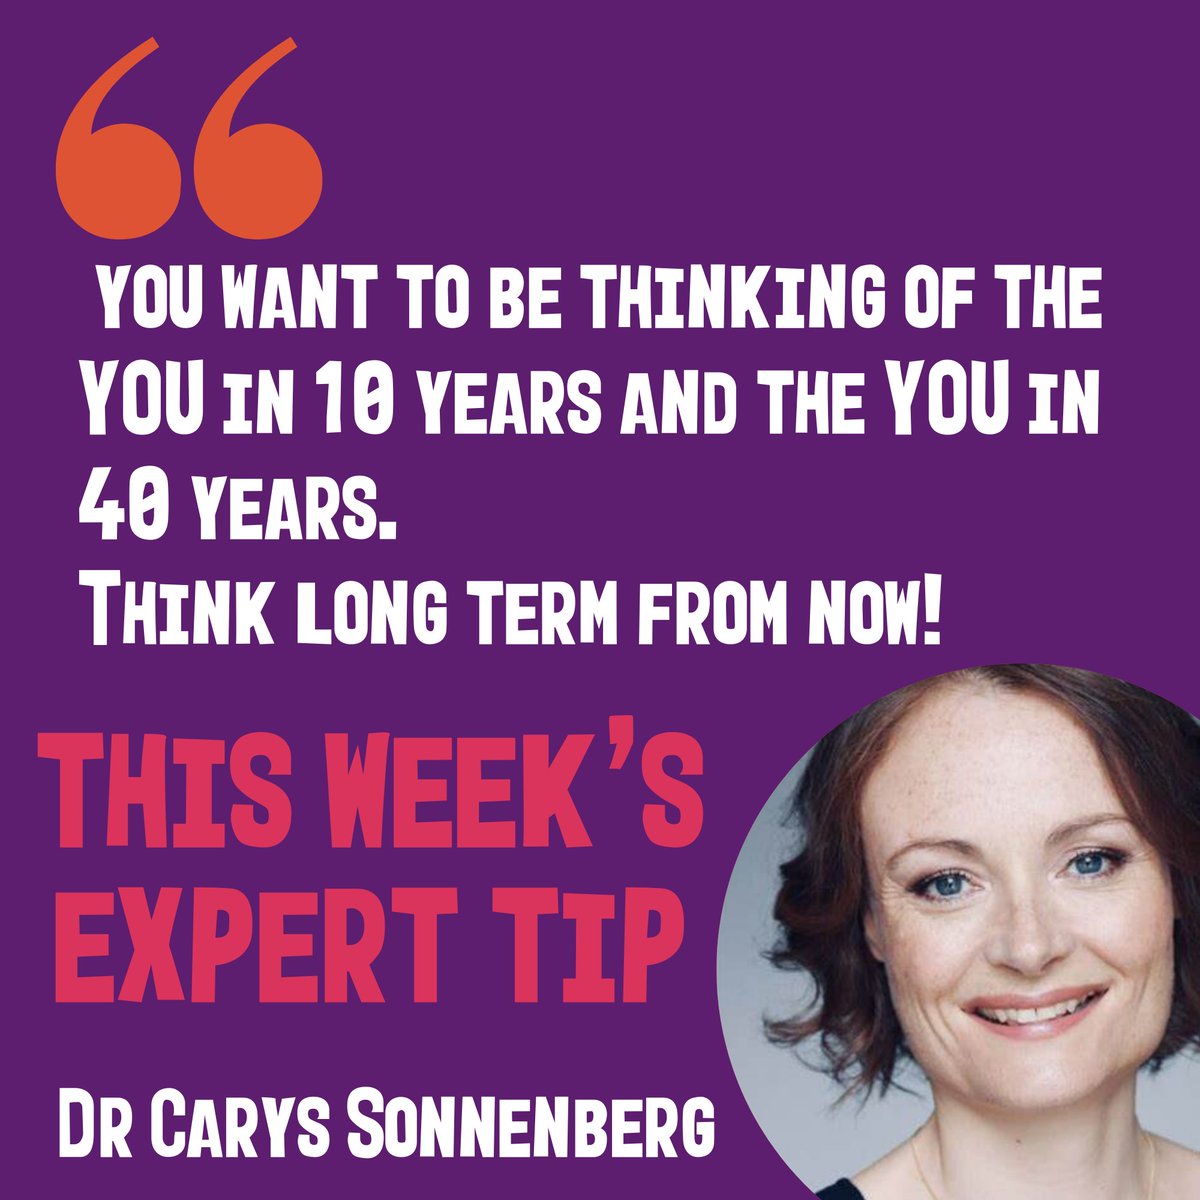 Dr Carys Sonnenberg is a GP with a special interest in women's #health and #menopause and she's also a member of the #BritishMenopauseSociety. Thank you Dr Sonnenberg for sharing your expert tip with us. #MenopauseMandate #MenopauseRevolution #Menopause #MenopauseSupport